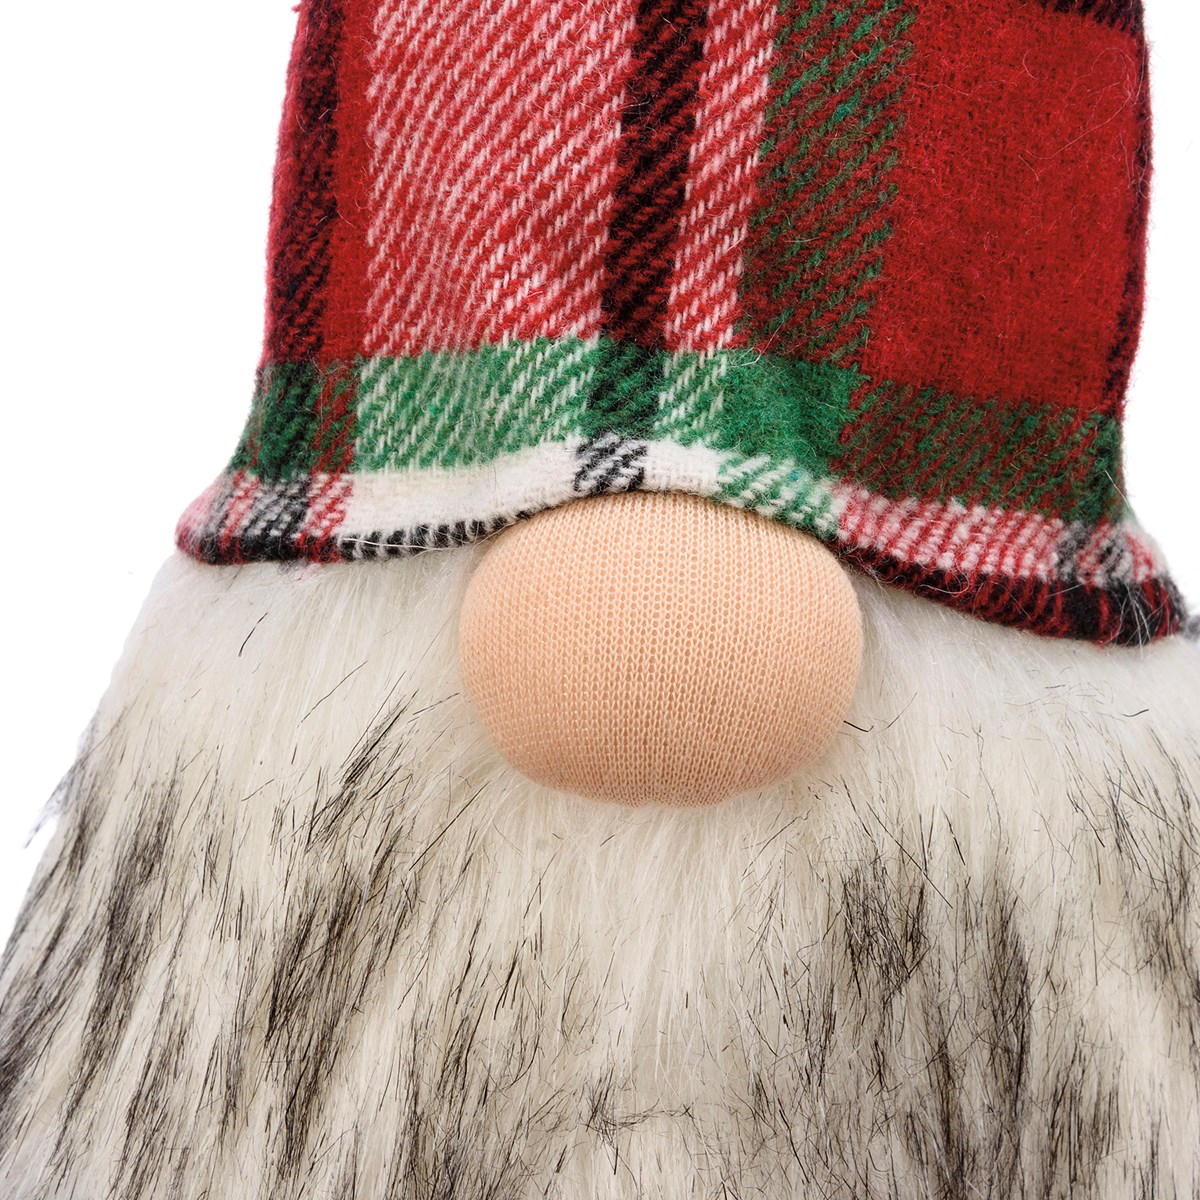 Gnome Hanging Legs Sitter - Polyester, Sand